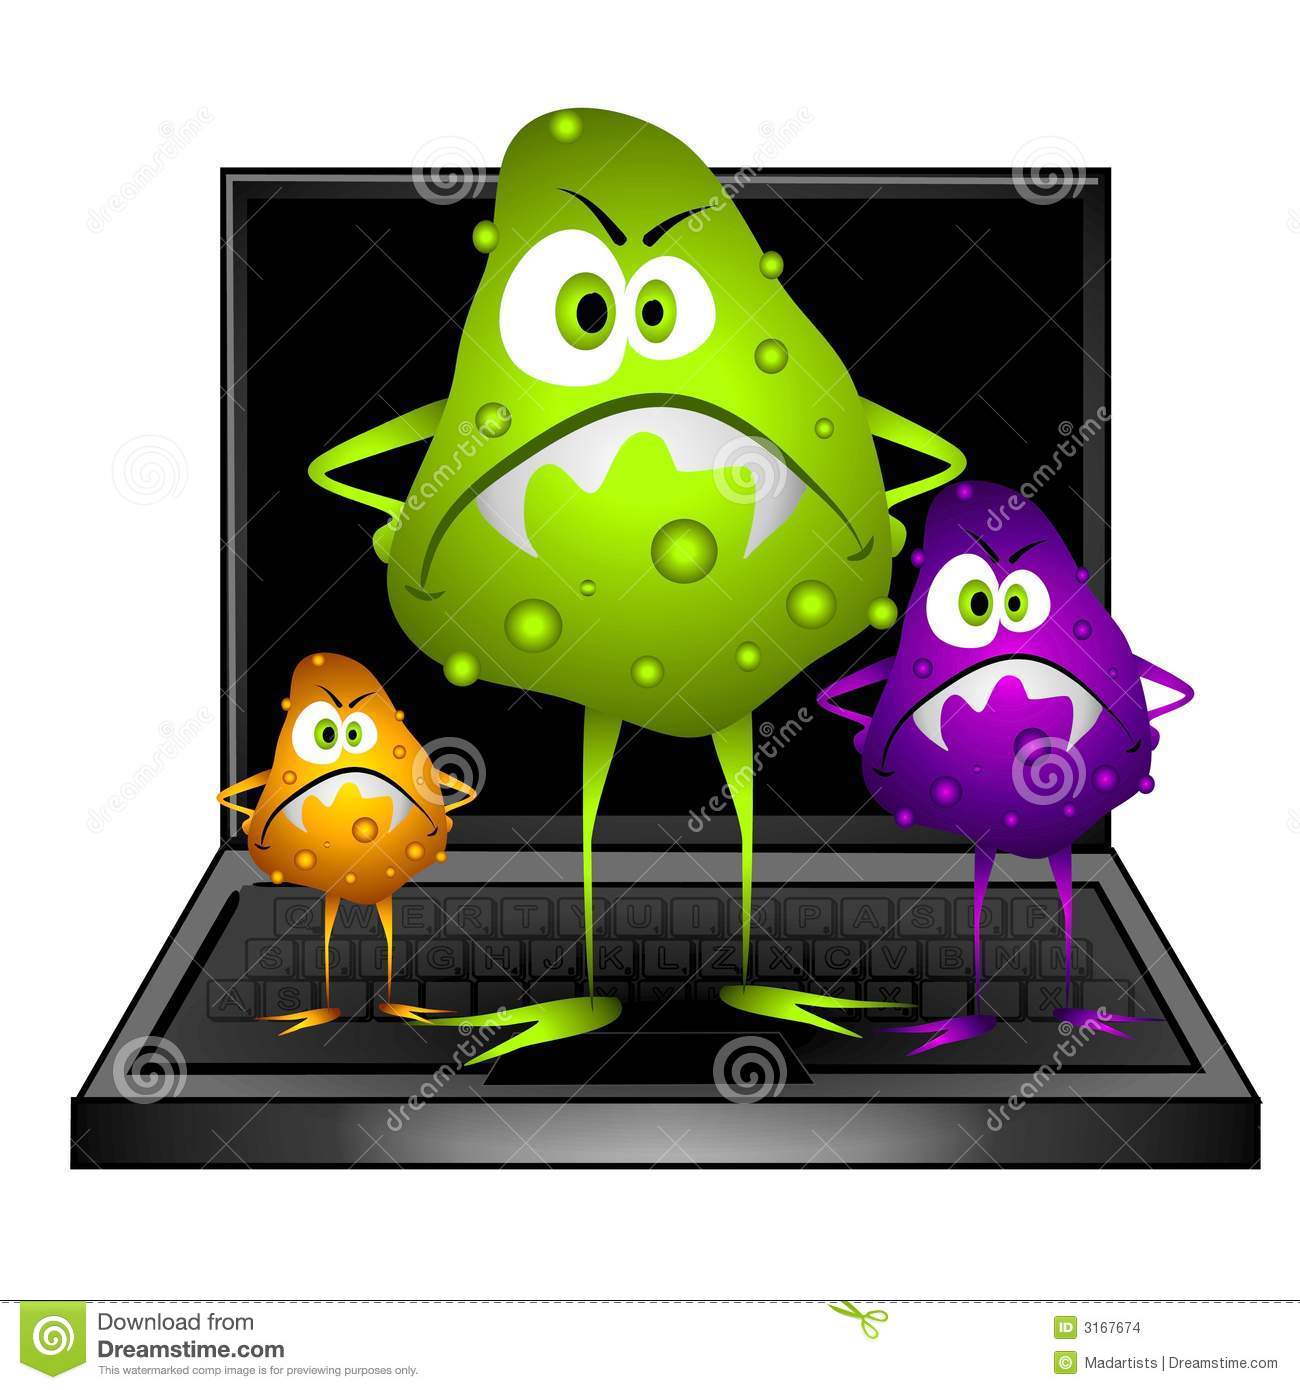 Computer Virus Bugs Clip Art Stock Images   Image  3167674